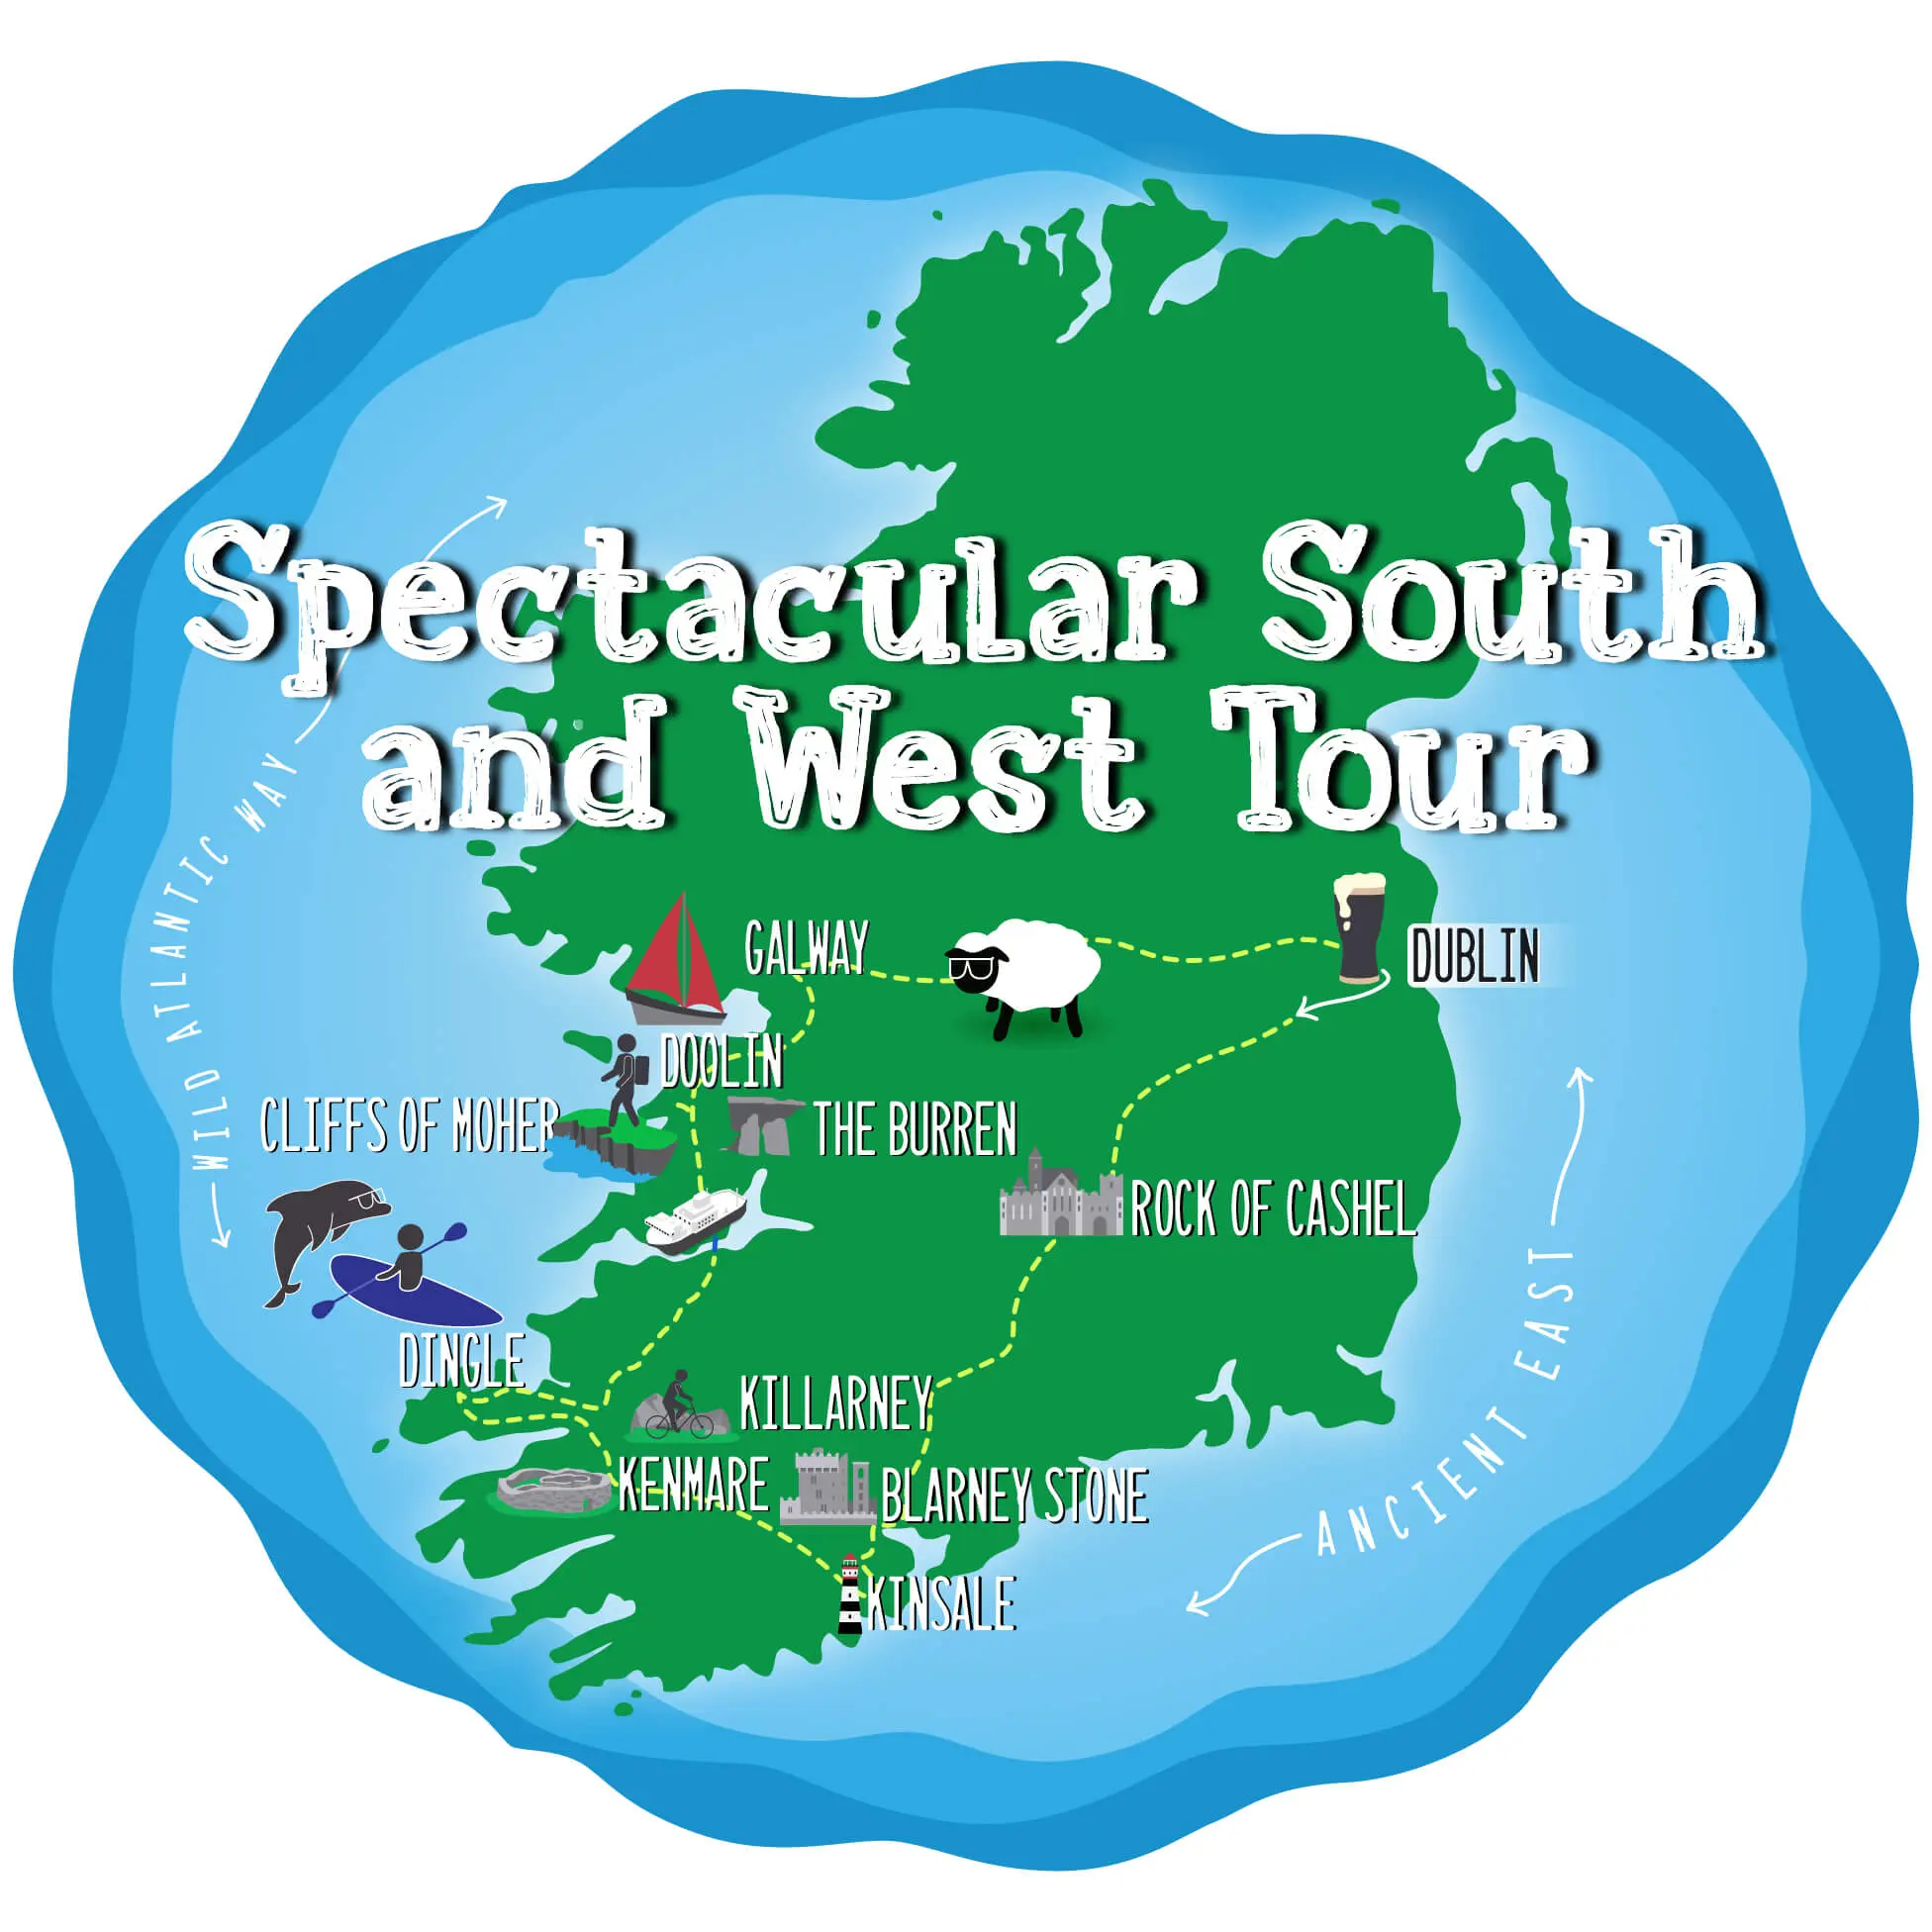 Illustration of a map highlighting a small group tour route in the south and west regions of Ireland, featuring famous landmarks such as the Cliffs of Moher and the Blarney Stone.